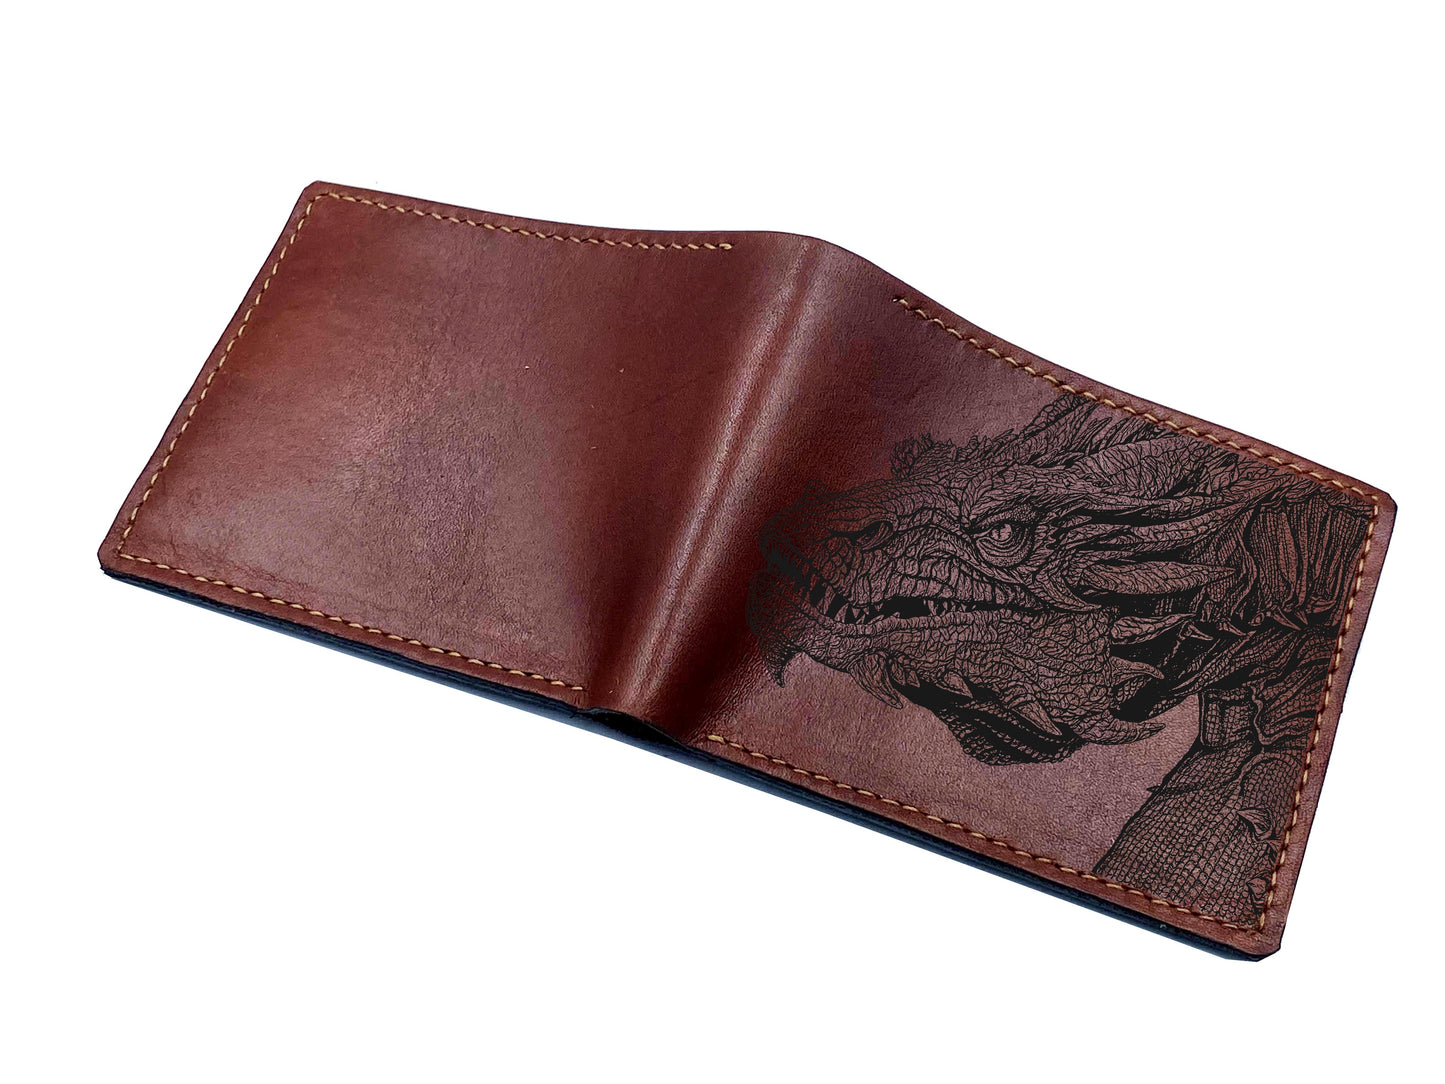 Mayan Corner - Customized leather handmade wallet for men, dragon men's wallet, gift for dad, husband, brother - Drogo dragon Game of Thrones - 3110224